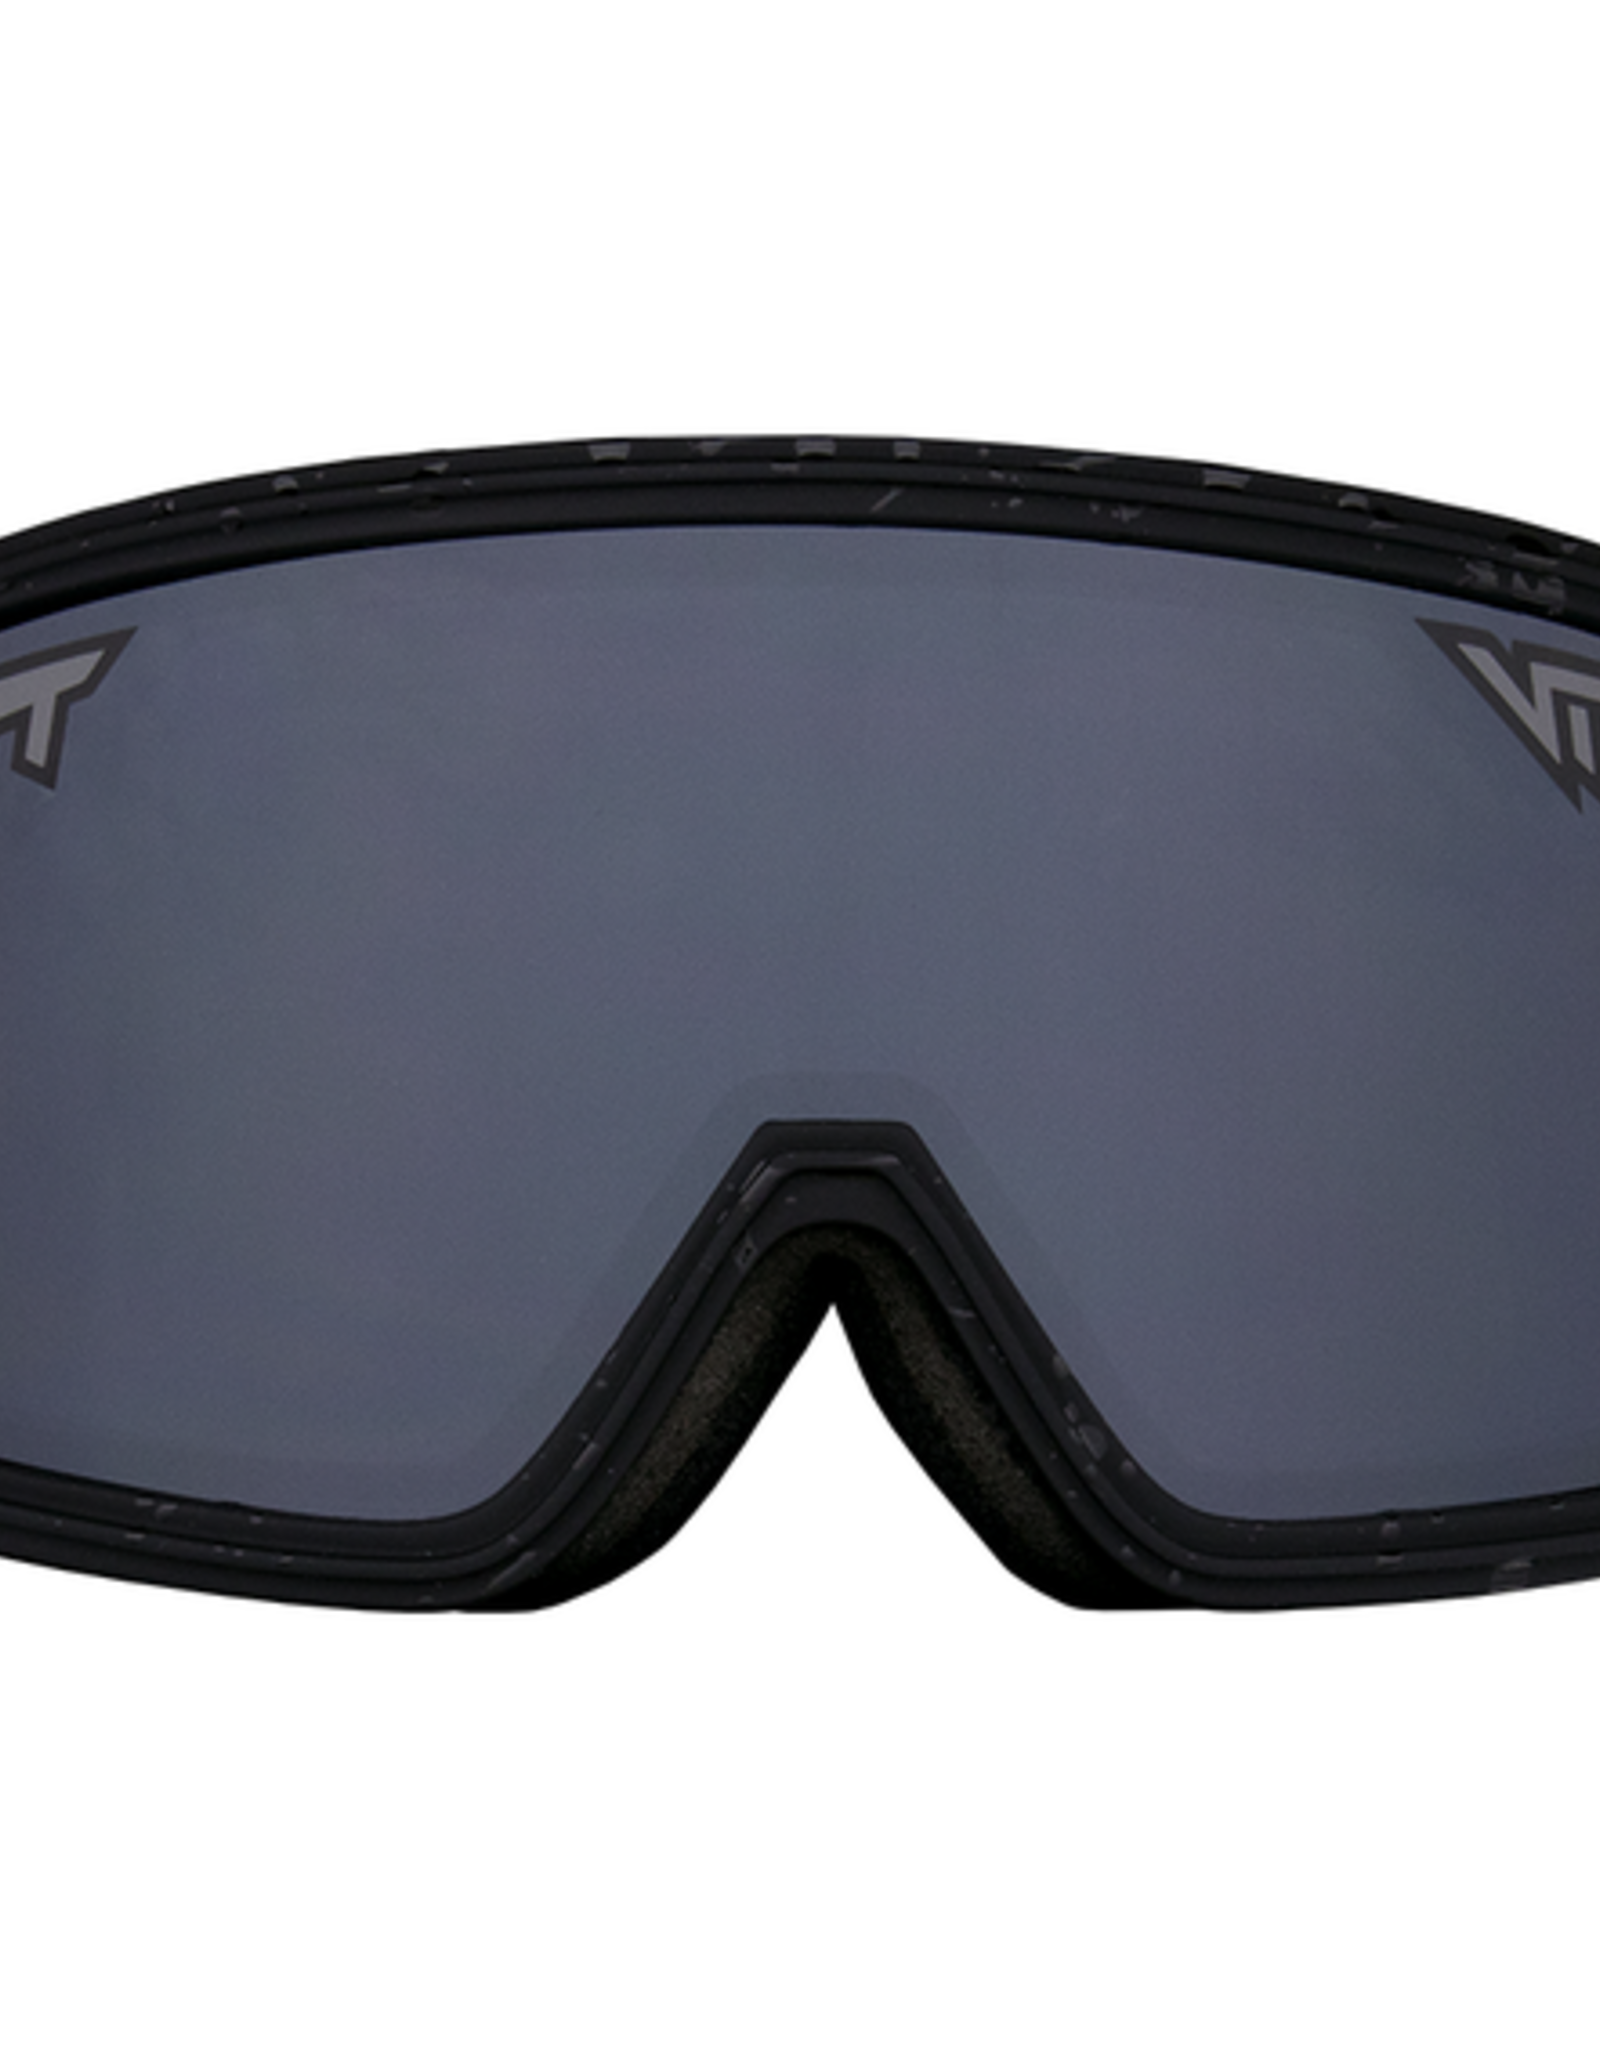 Pit Viper Pit Viper - GOGGLES - The Blacking Out